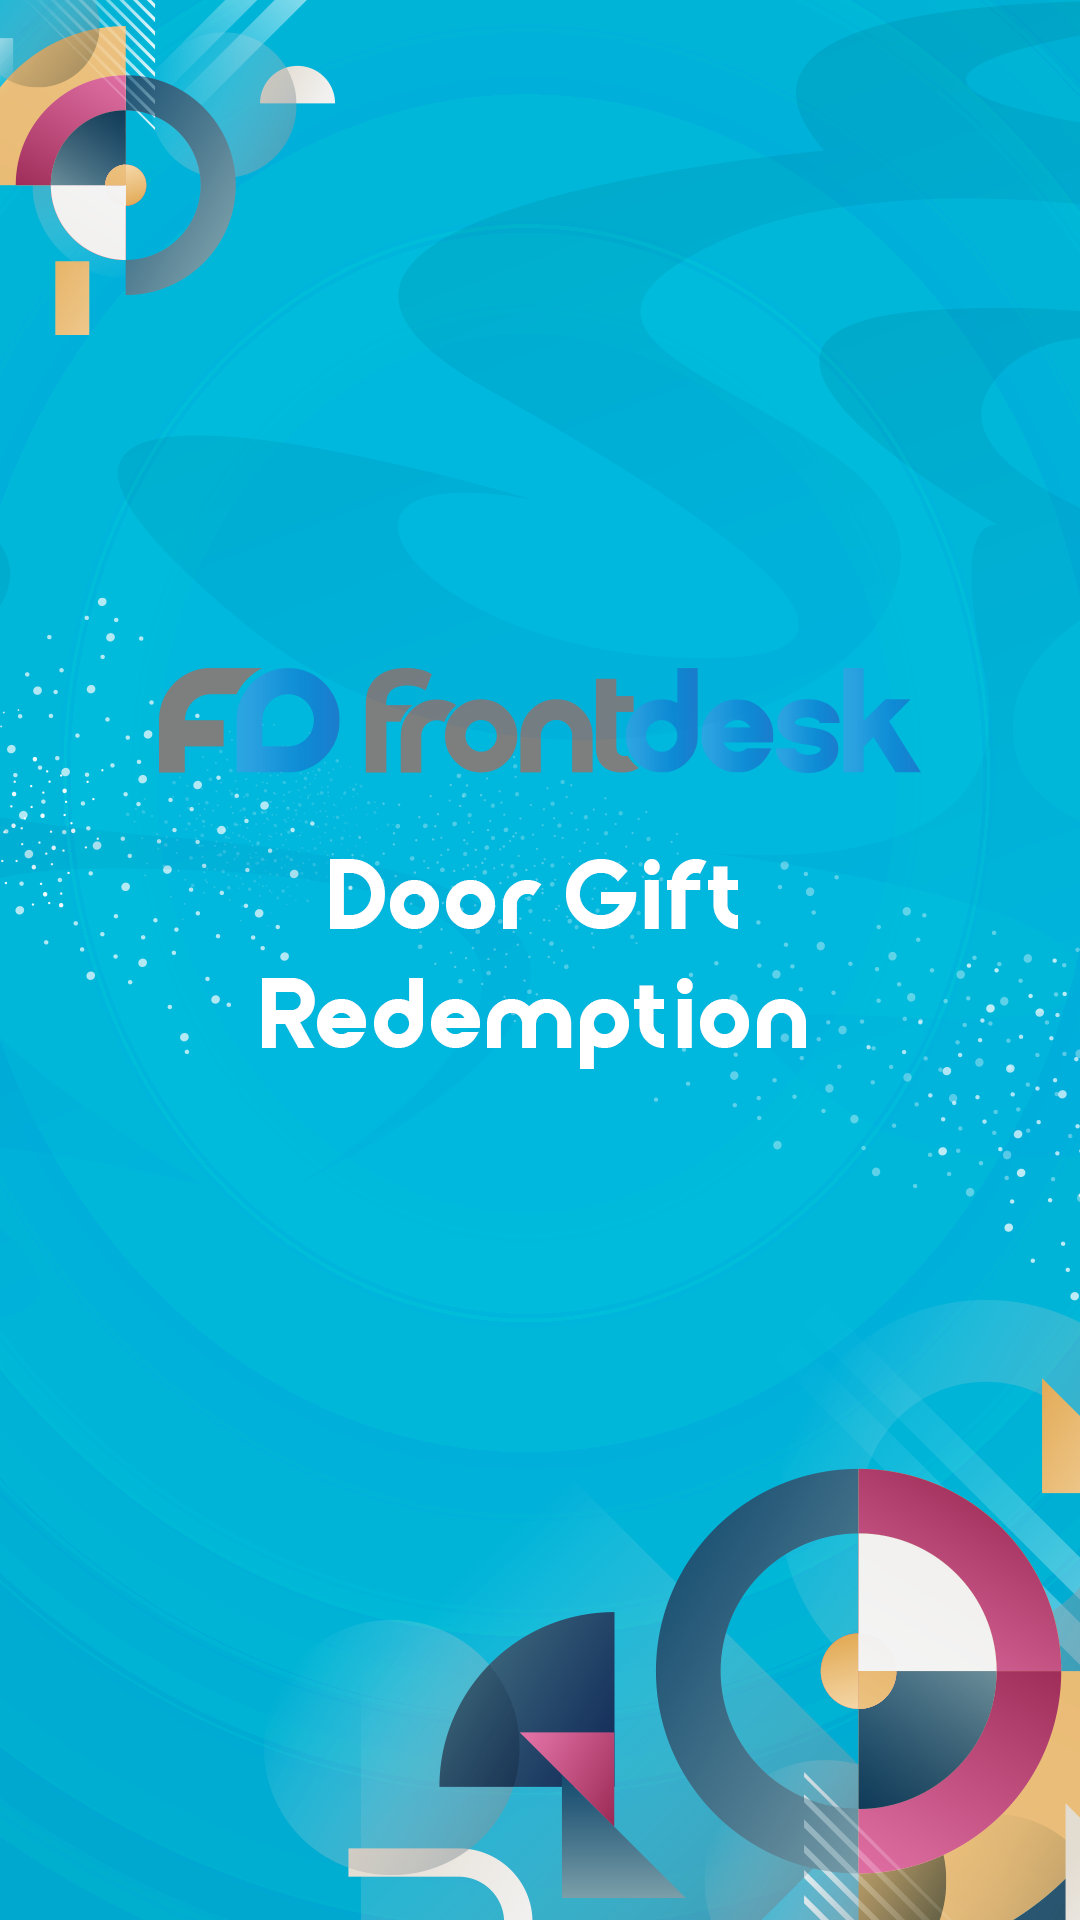 The image depicts an event technology kiosk specifically designed for door gift redemption. The kiosk serves as a self-service station where event attendees can claim their door gifts or giveaways. It showcases a user-friendly interface with options for attendees to input their information or scan their event badges to initiate the redemption process. The kiosk may include a display area where attendees can view available gift options and make their selections. Friendly instructions and guidance are provided on the kiosk screen to ensure a smooth and efficient redemption experience.